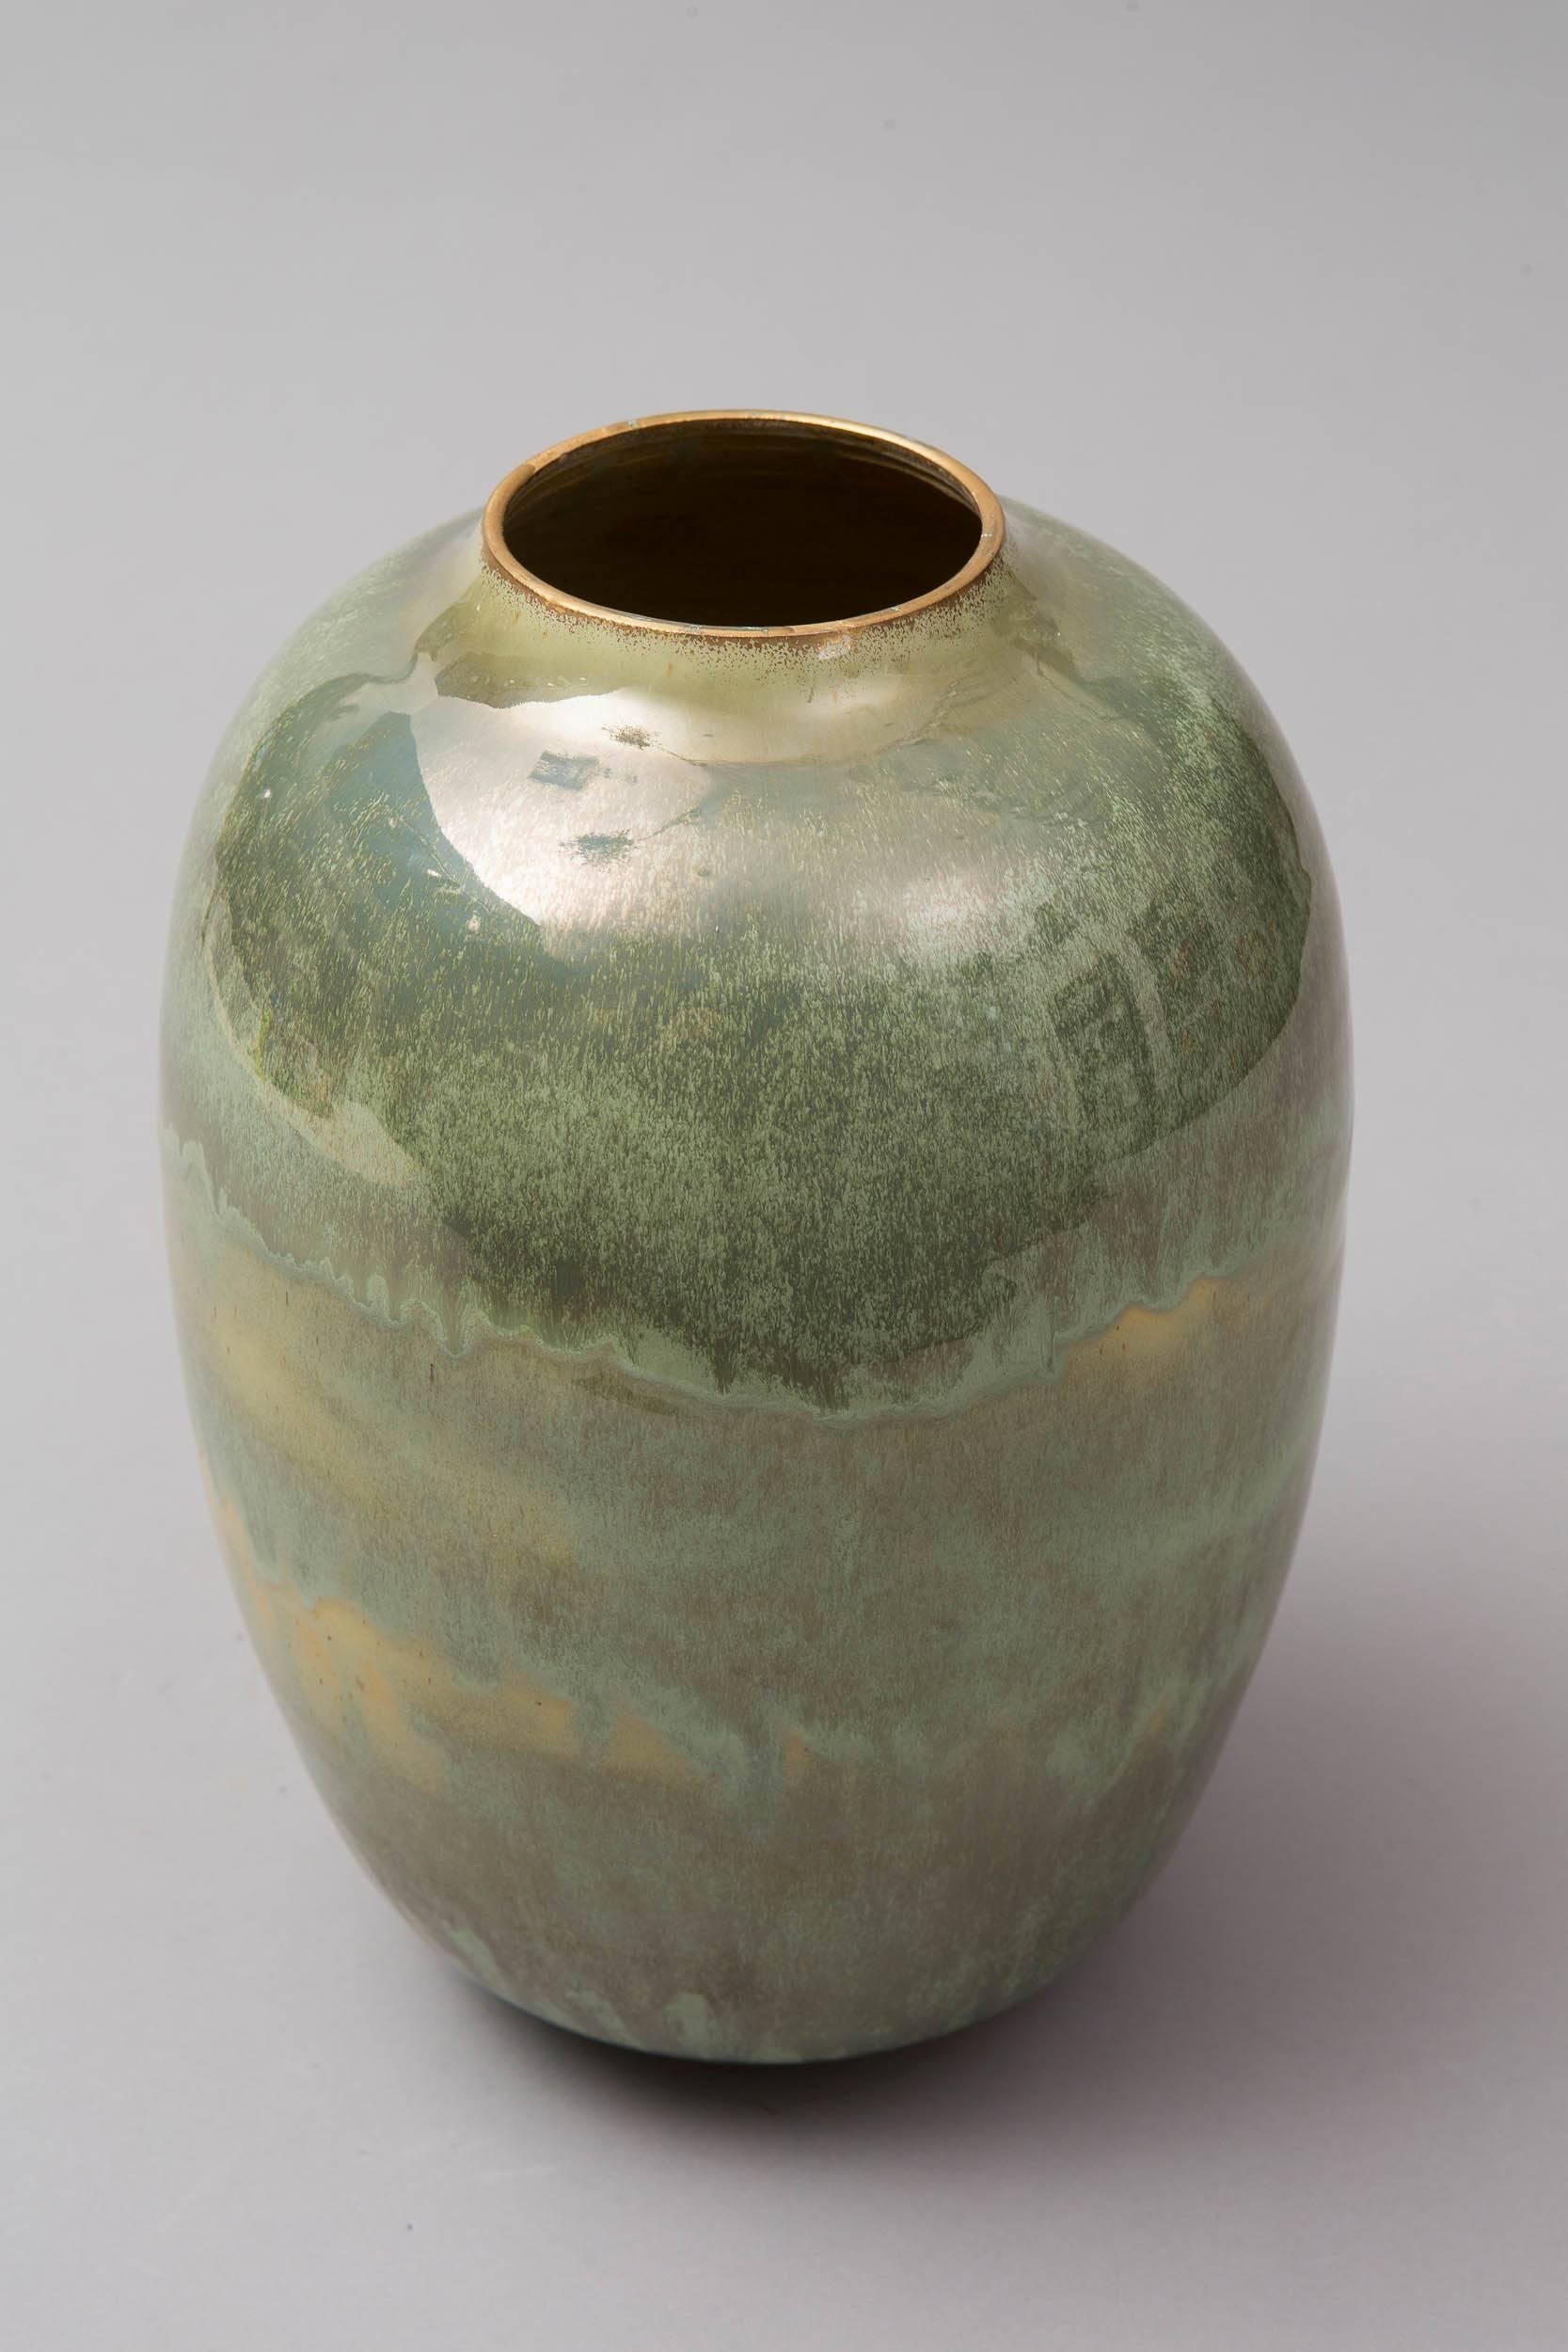 Wheel thrown white stoneware vase.
Green celadon.
Glazed and gilded.
One of a kind signed on the bottom.
